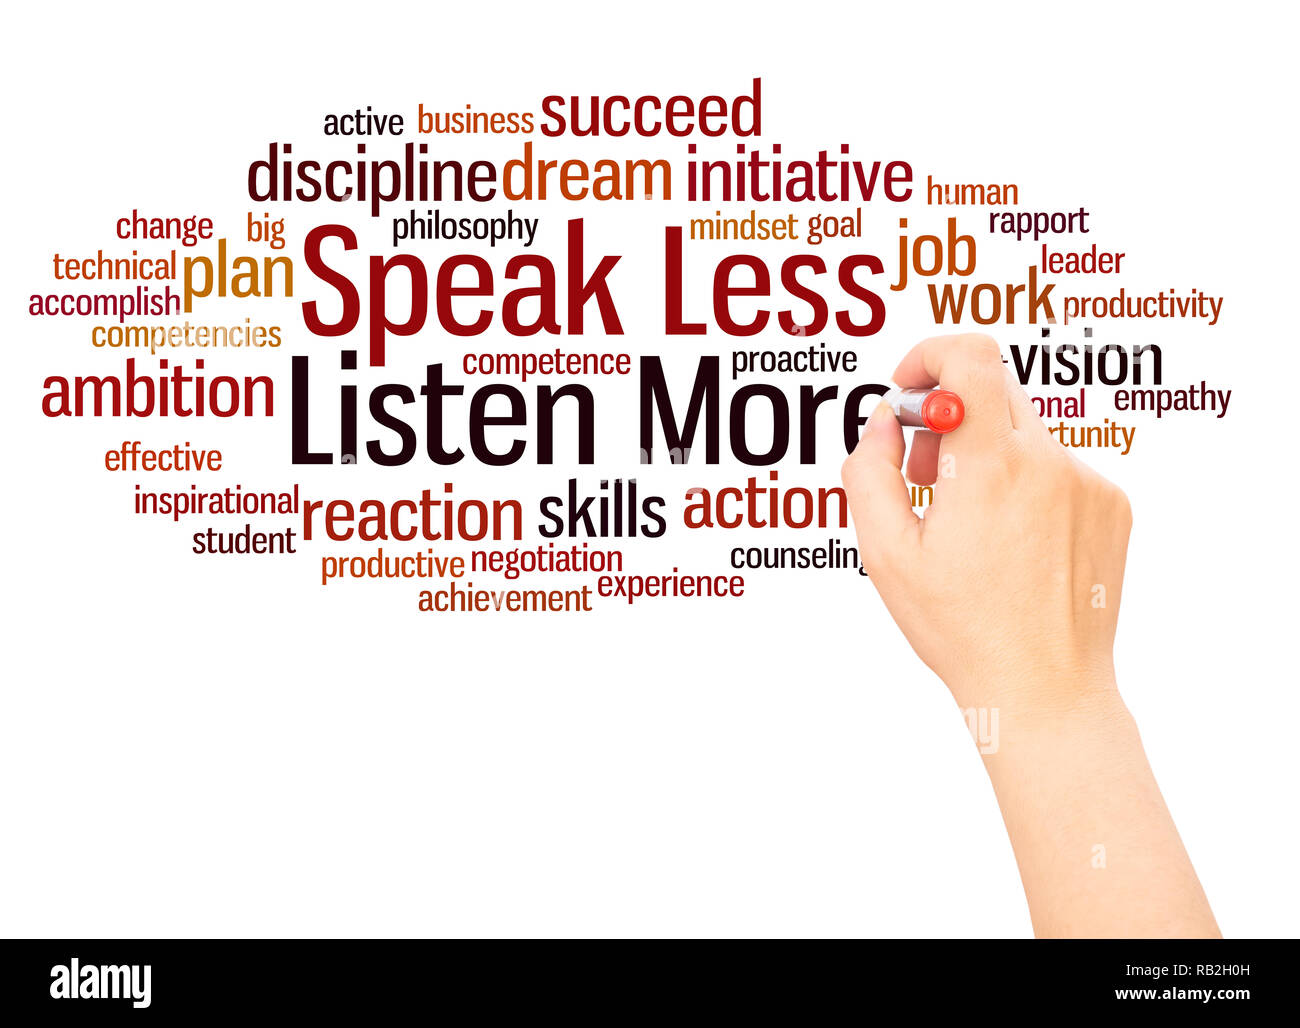 Speak Less Listen More word cloud hand writing concept on white background. Stock Photo